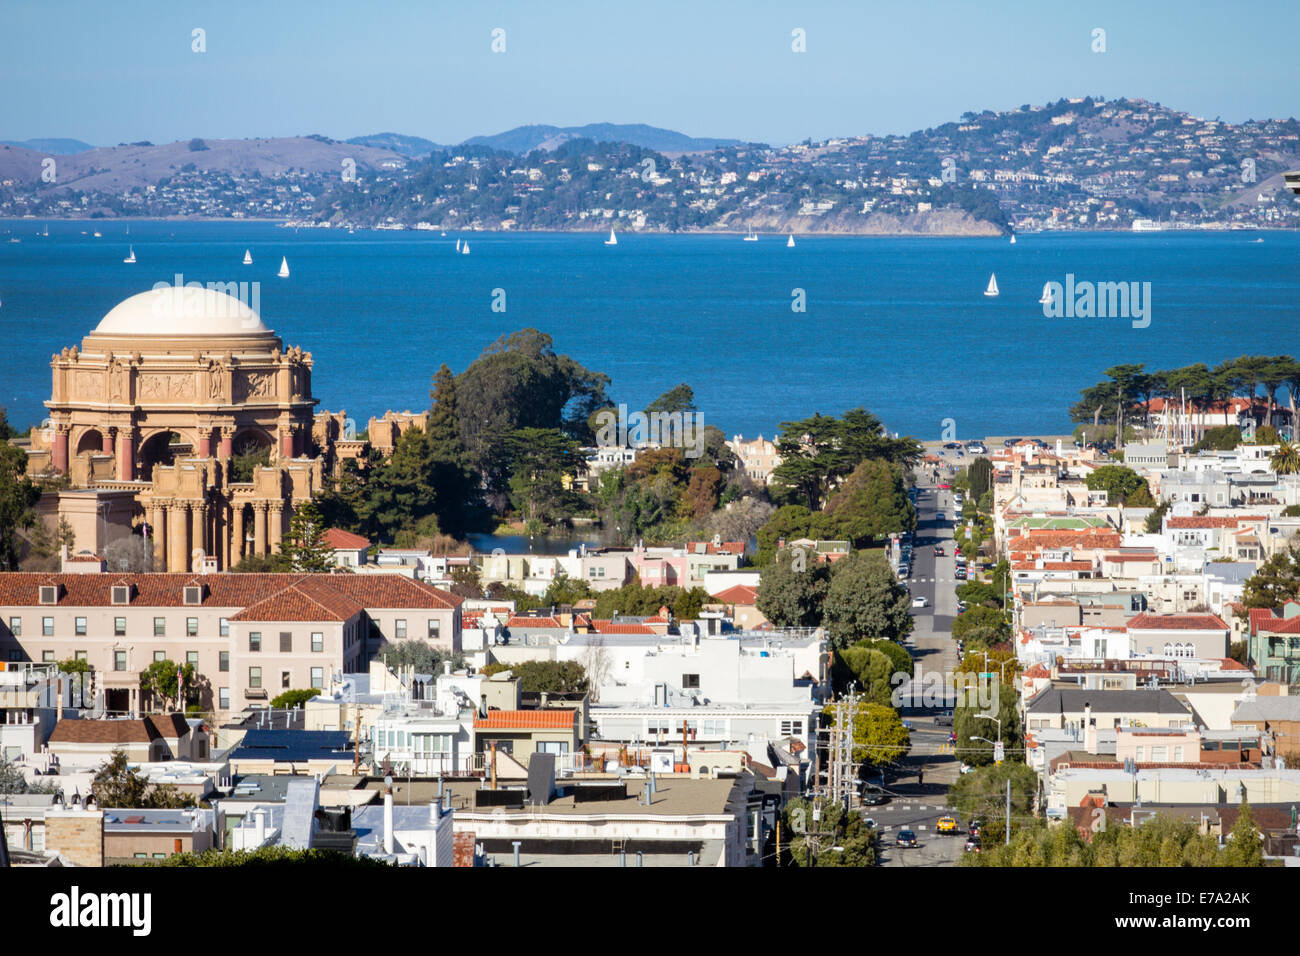 Overlooking San Francisco marina district with Palace of Fine Arts